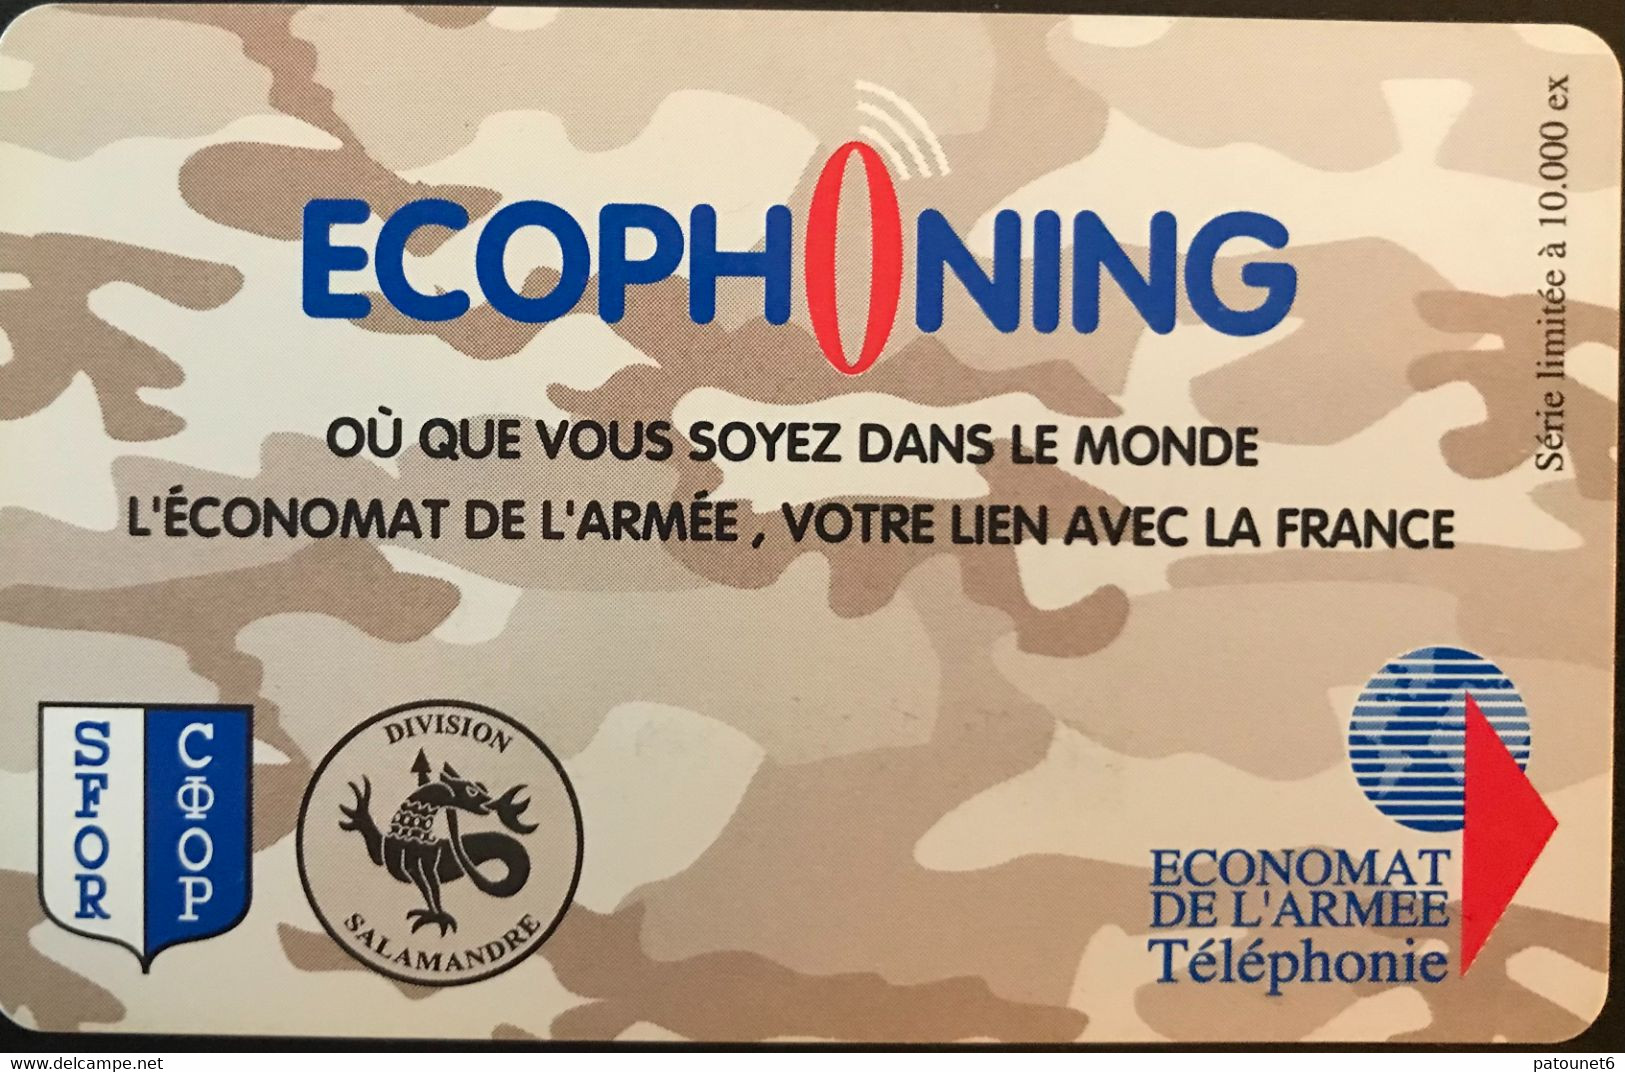 FRANCE  -  ARMEE  -  Prepaid  -  ECOPHONING  - SFOR - Division Salamandre - Marron Clair - Military Phonecards